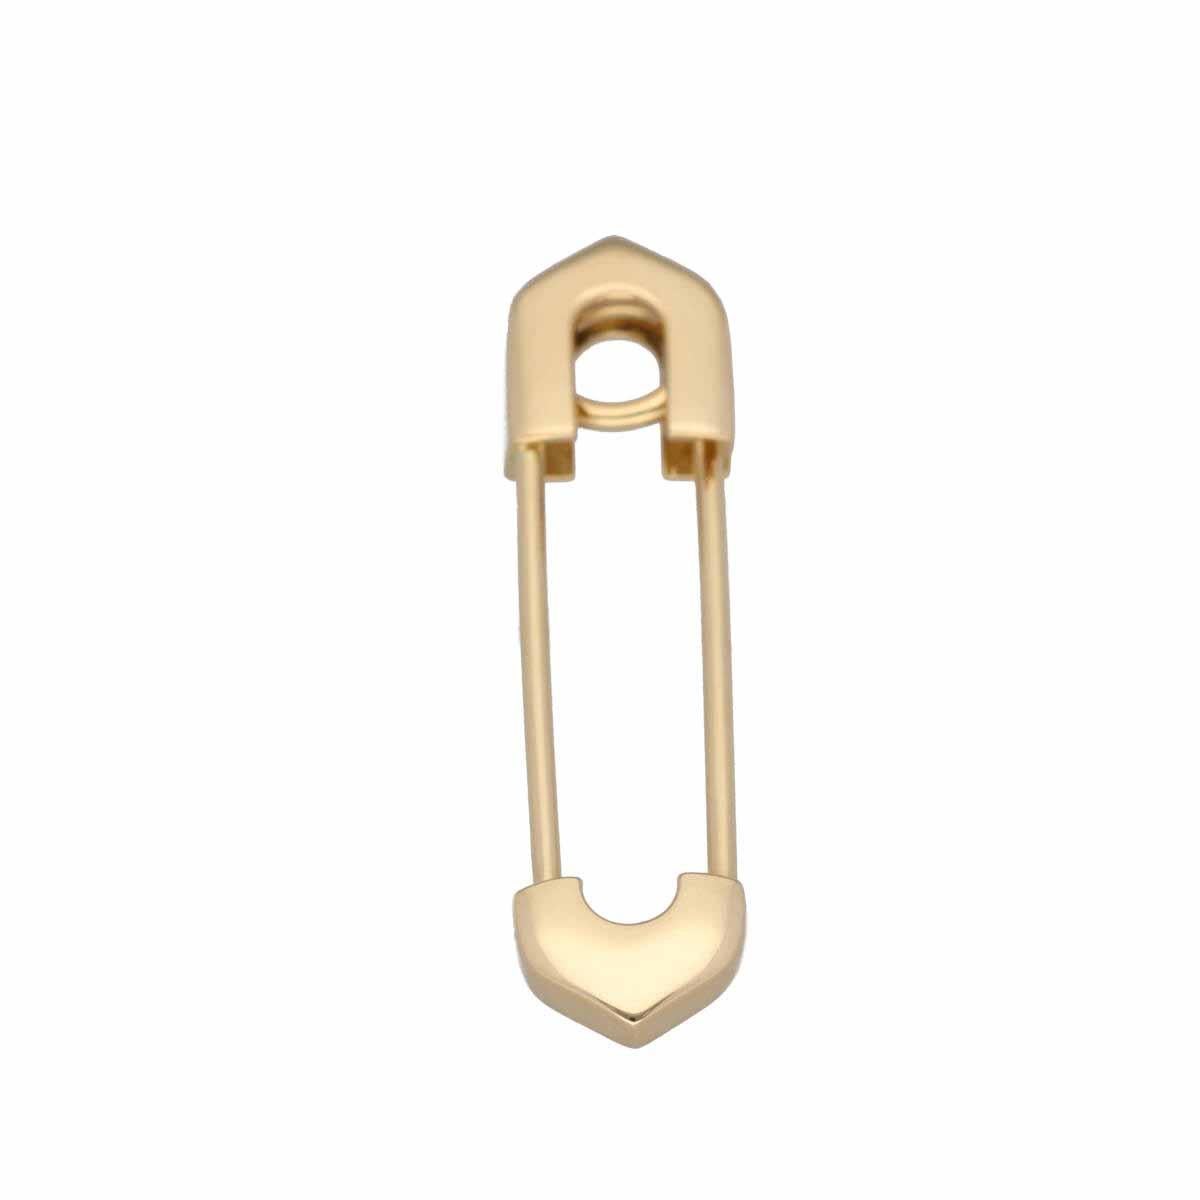 Brand:Cartier
Name:C ENTRELACES MOTIVE SAFETY PIN
Material:750 K18 YG yellow gold
Weight:2.9g（Approx)
Size（inch):35mm×8.51mm / 1.37in×0.33in
Comes with:Cartier Box, Case, Cartier Repair Certificate (Nov 2021)
